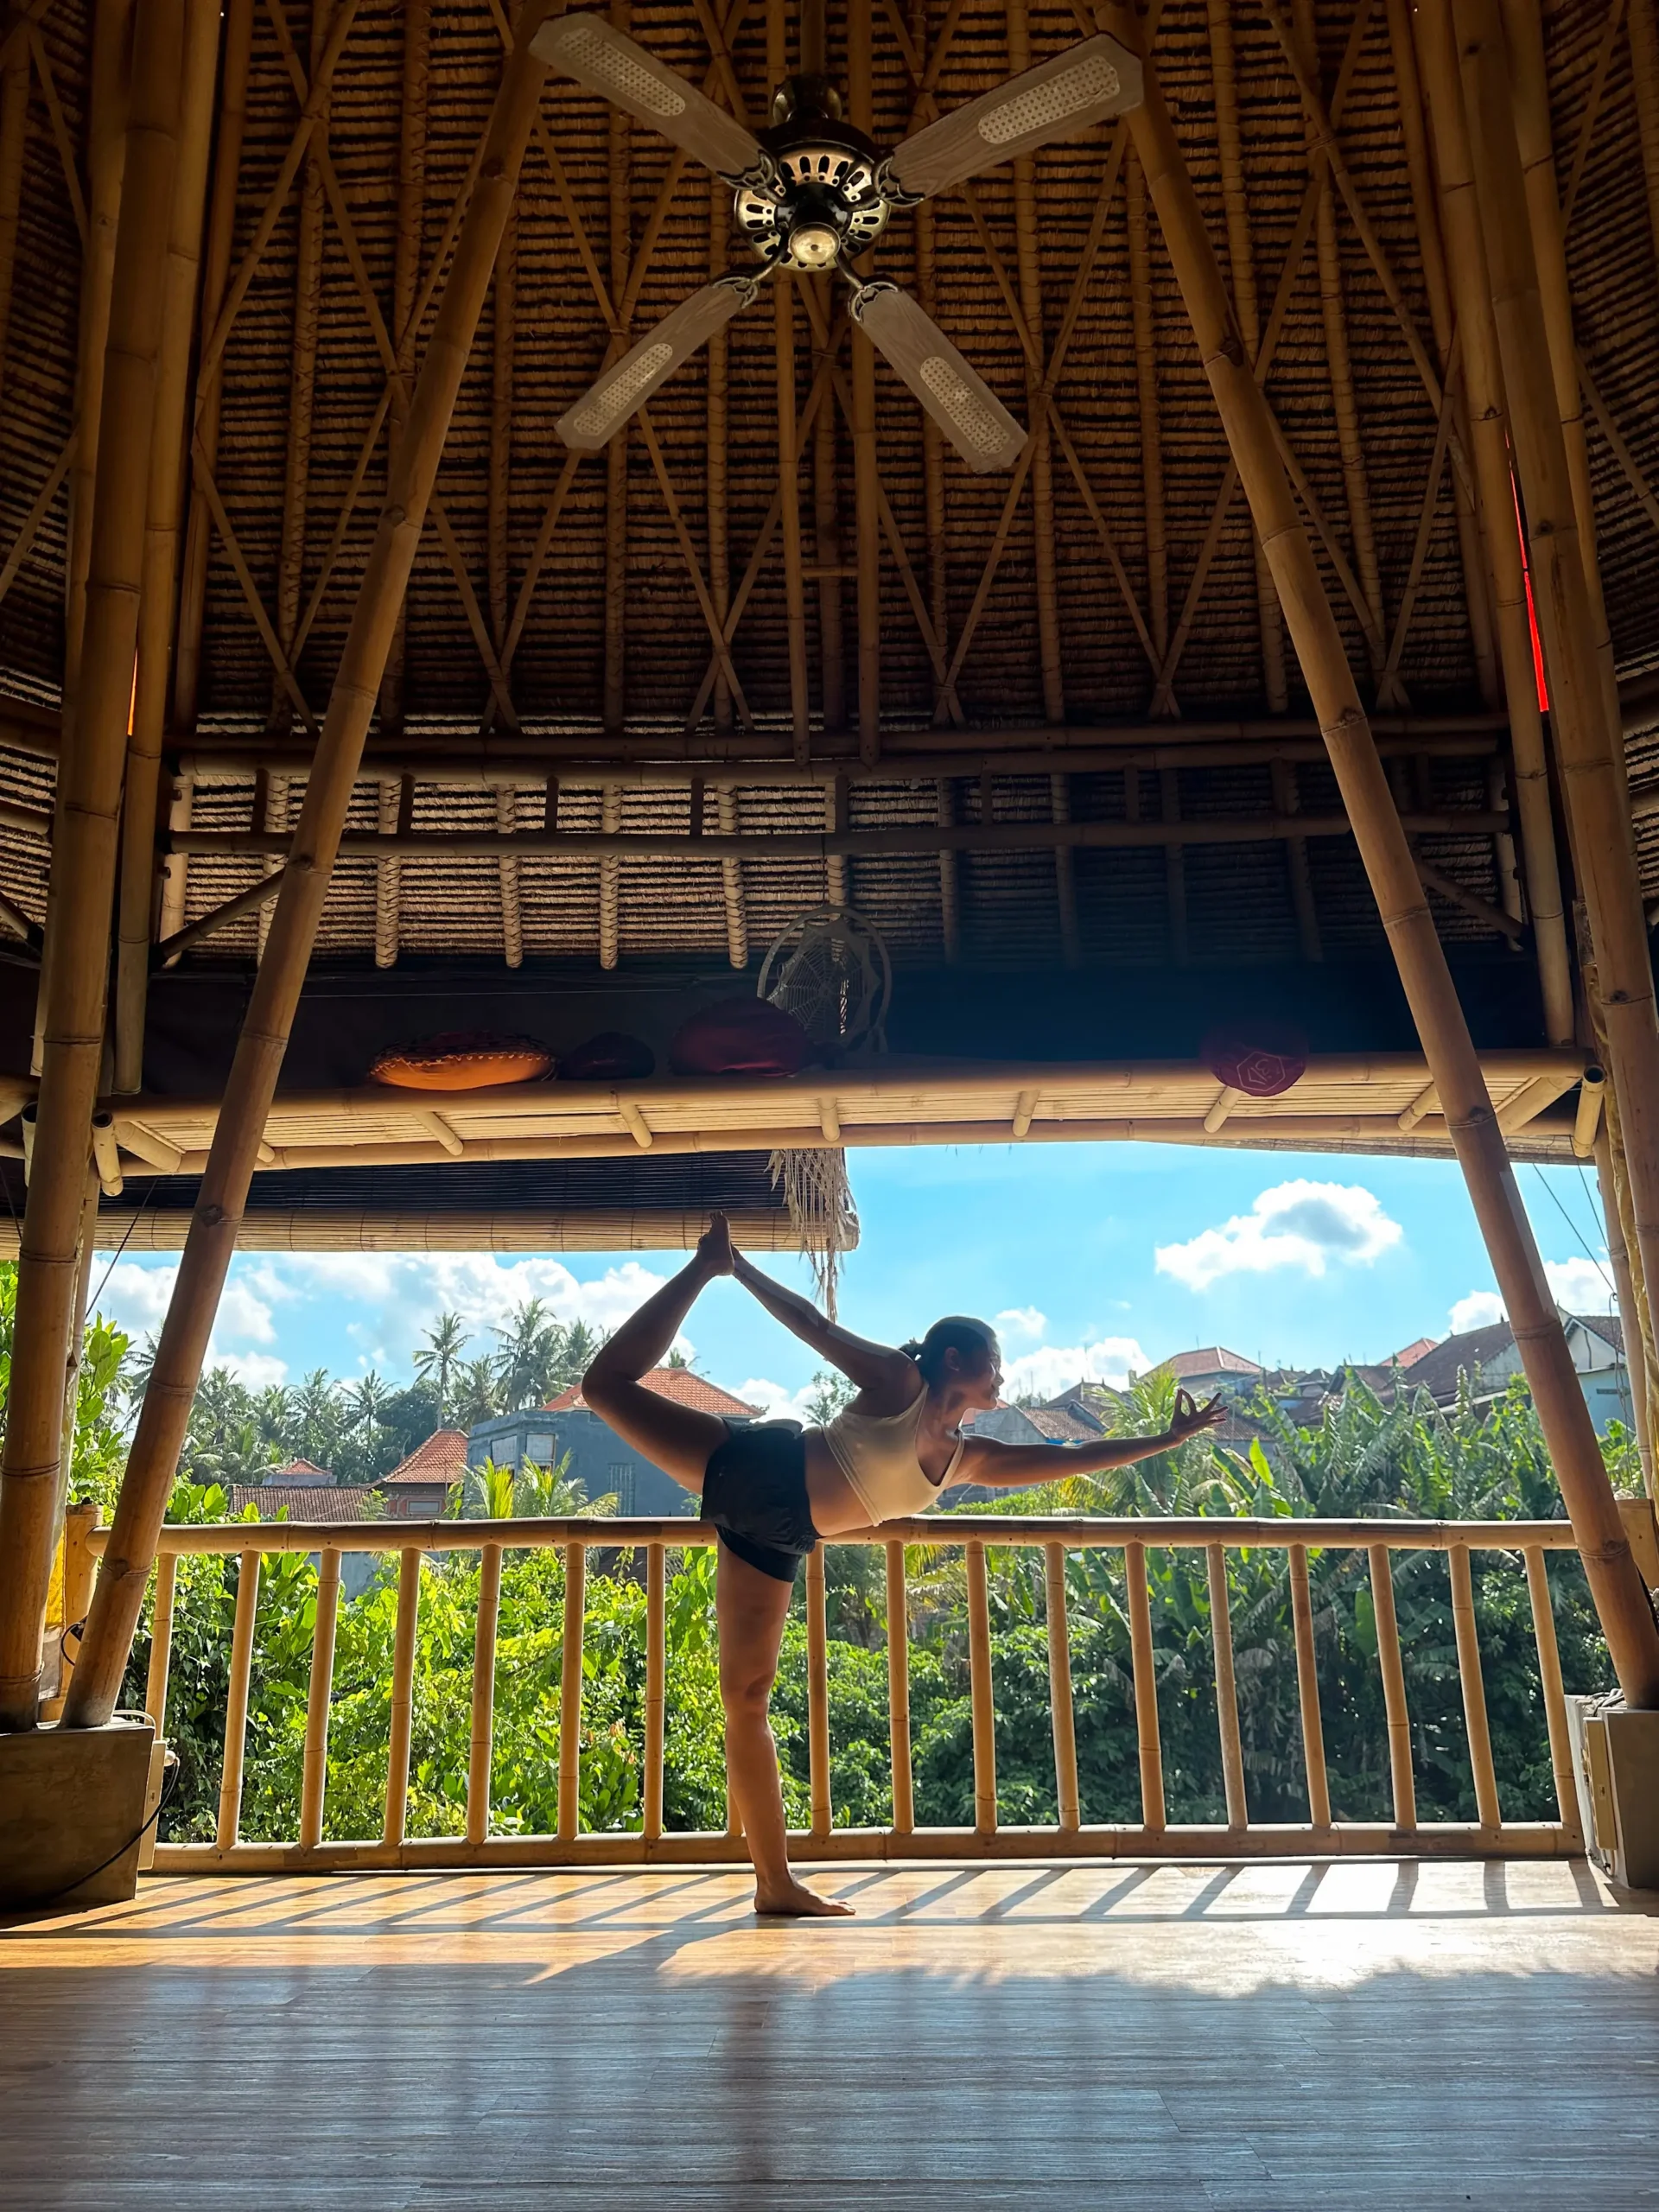 Me in a dancer's pose,balancing gracefully in a spacious, open-air bamboo pavilion at a yoga retreat in Bali. 